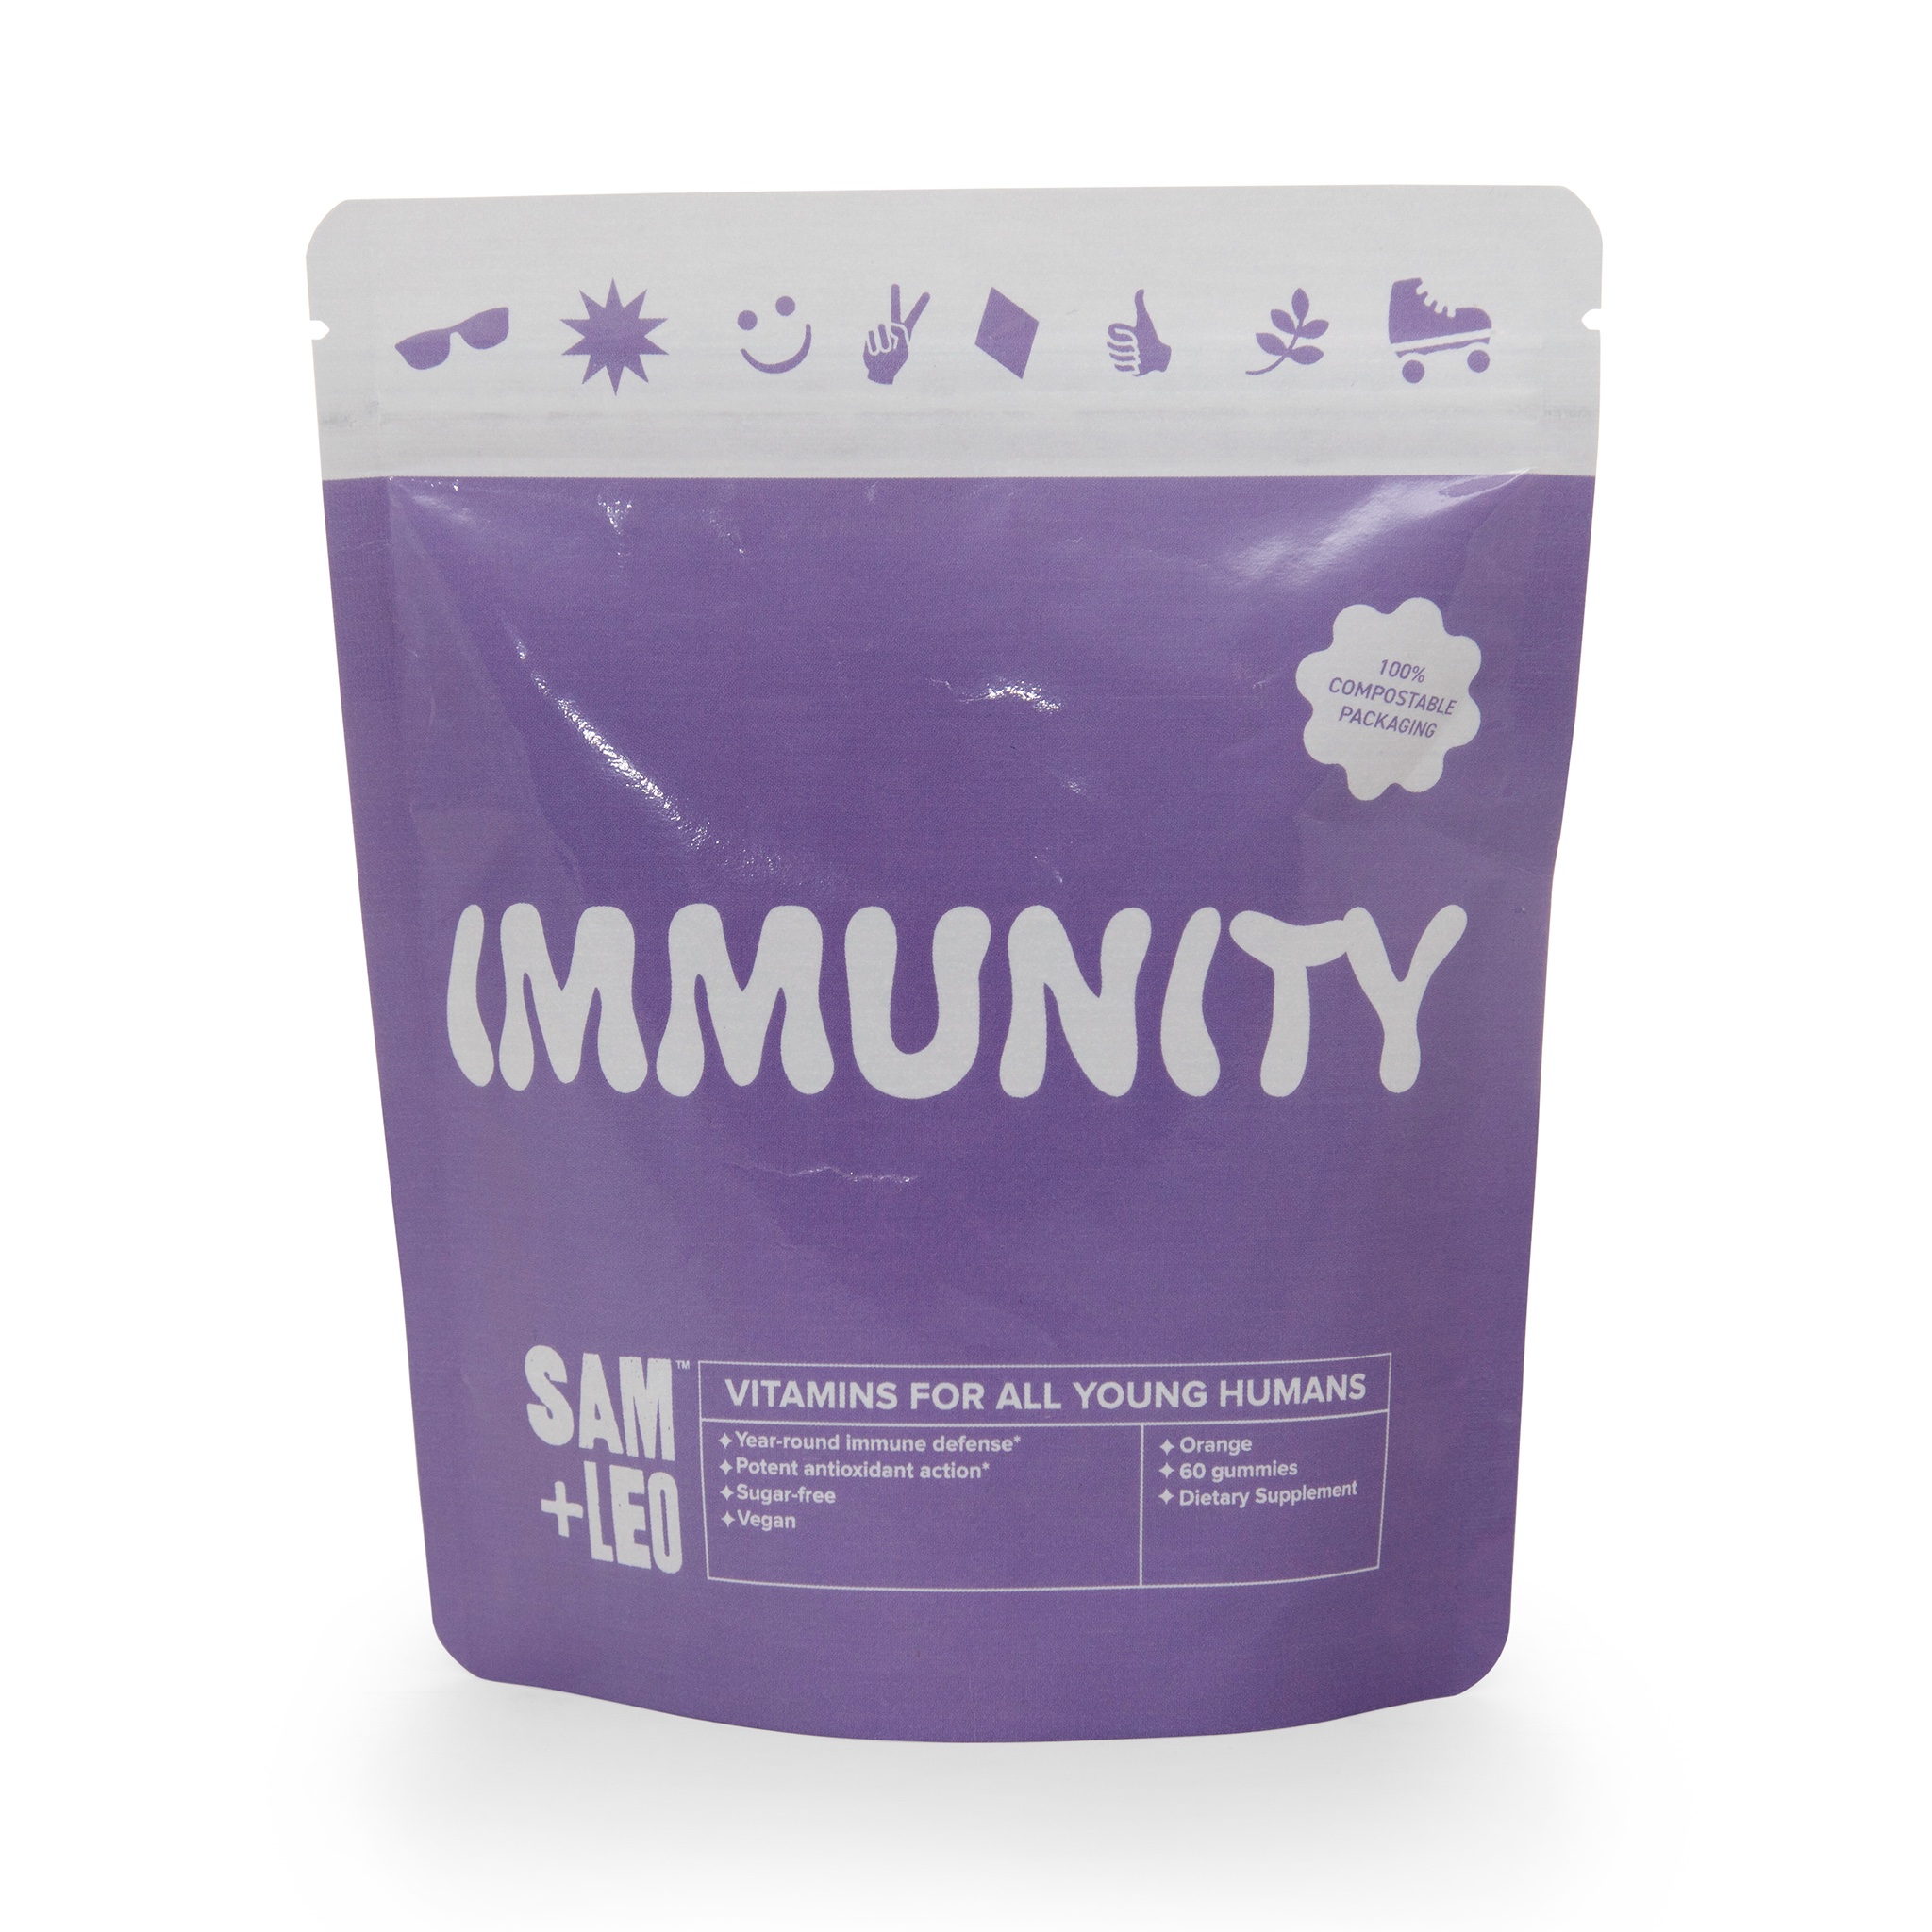 Immunity is one of the most important health option today.